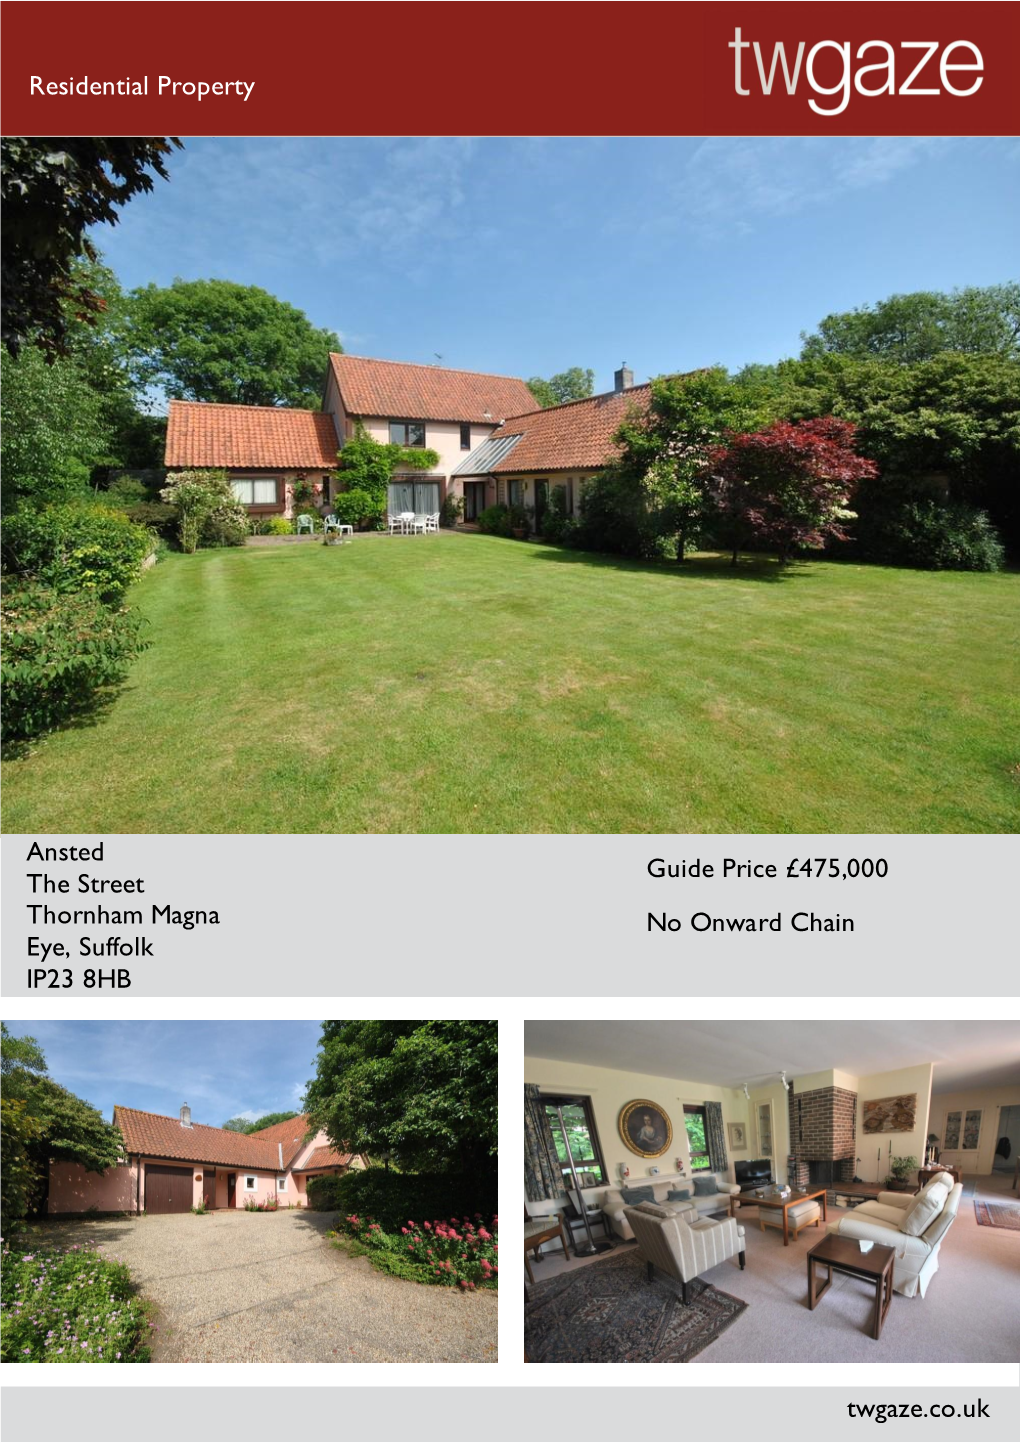 Residential Property Ansted the Street Thornham Magna Eye, Suffolk IP23 8HB Guide Price £475,000 No Onward Chain Twgaze.Co.Uk